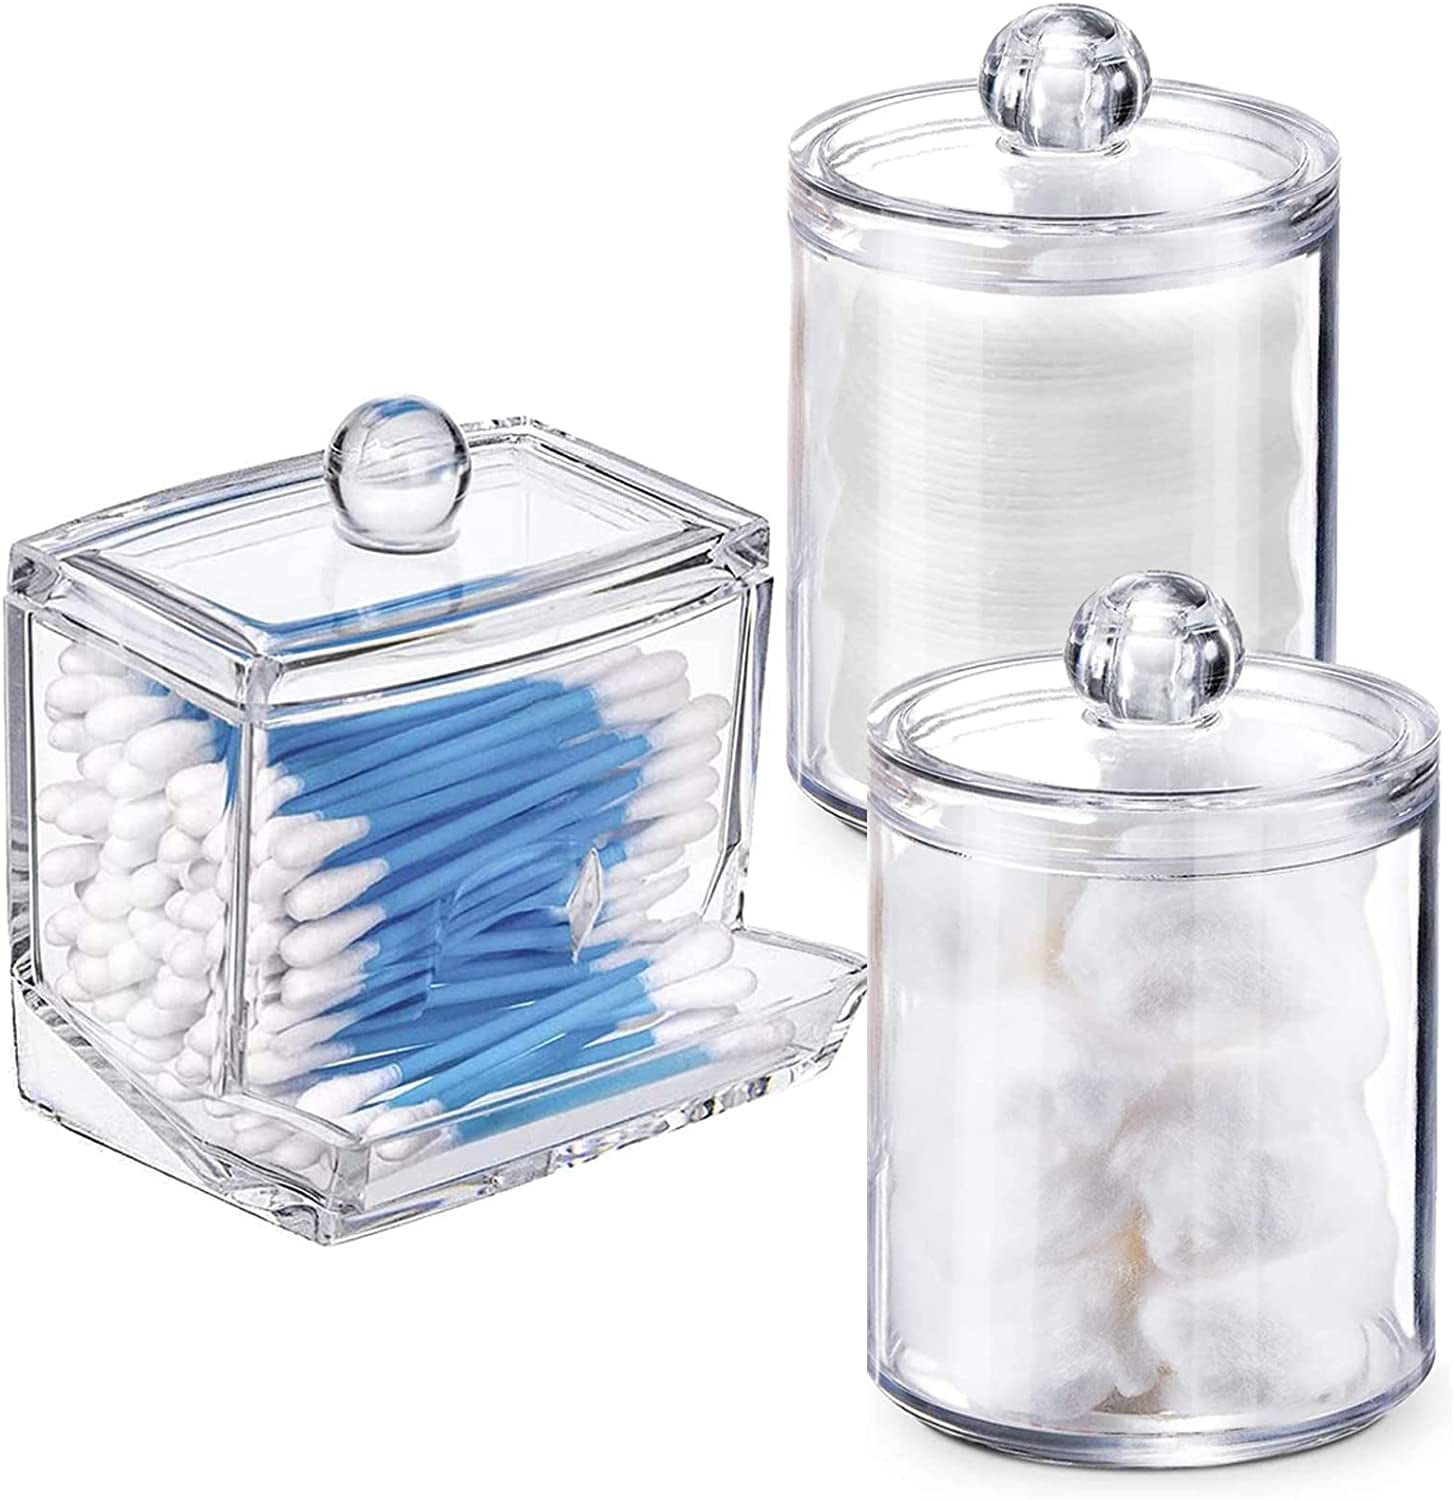 Plastic Cotton Ball Holder with Lid for Cotton Swabs Make Up Pads Apothecary Jars 2 in 1 Q-Tips 